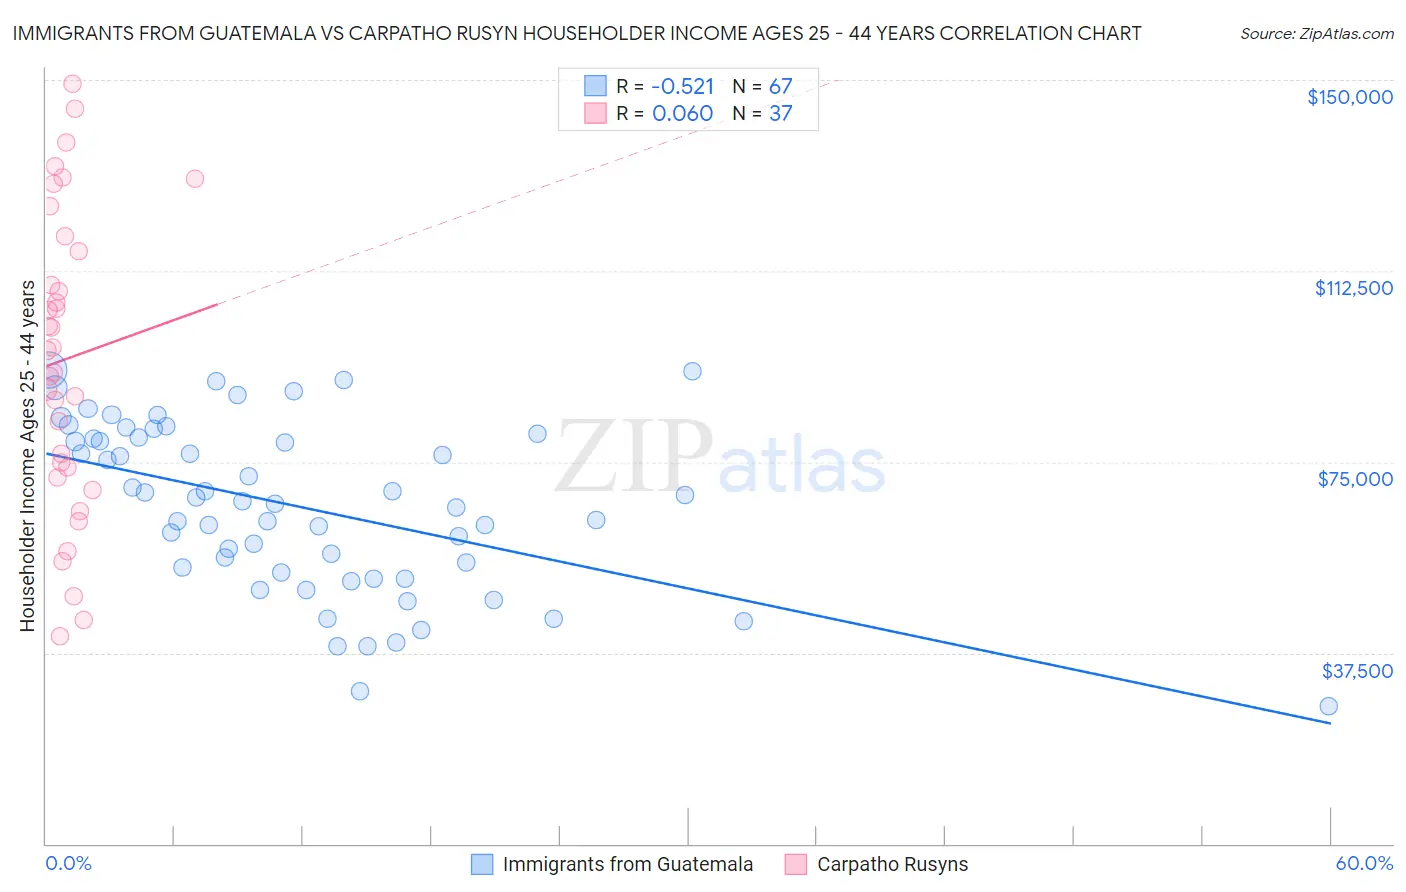 Immigrants from Guatemala vs Carpatho Rusyn Householder Income Ages 25 - 44 years